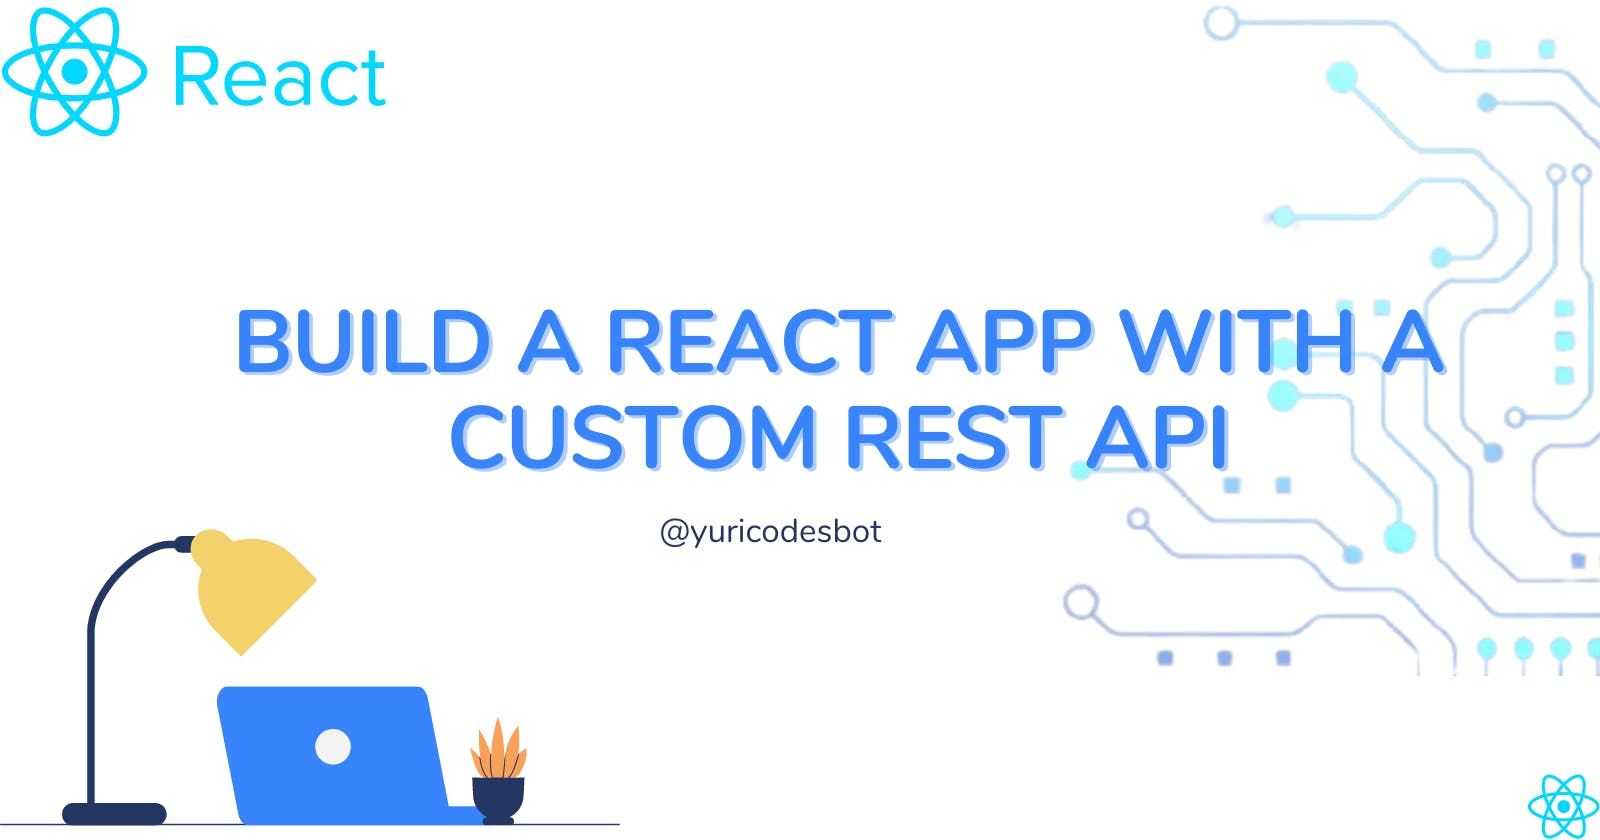 Build a React app AND your own custom REST API